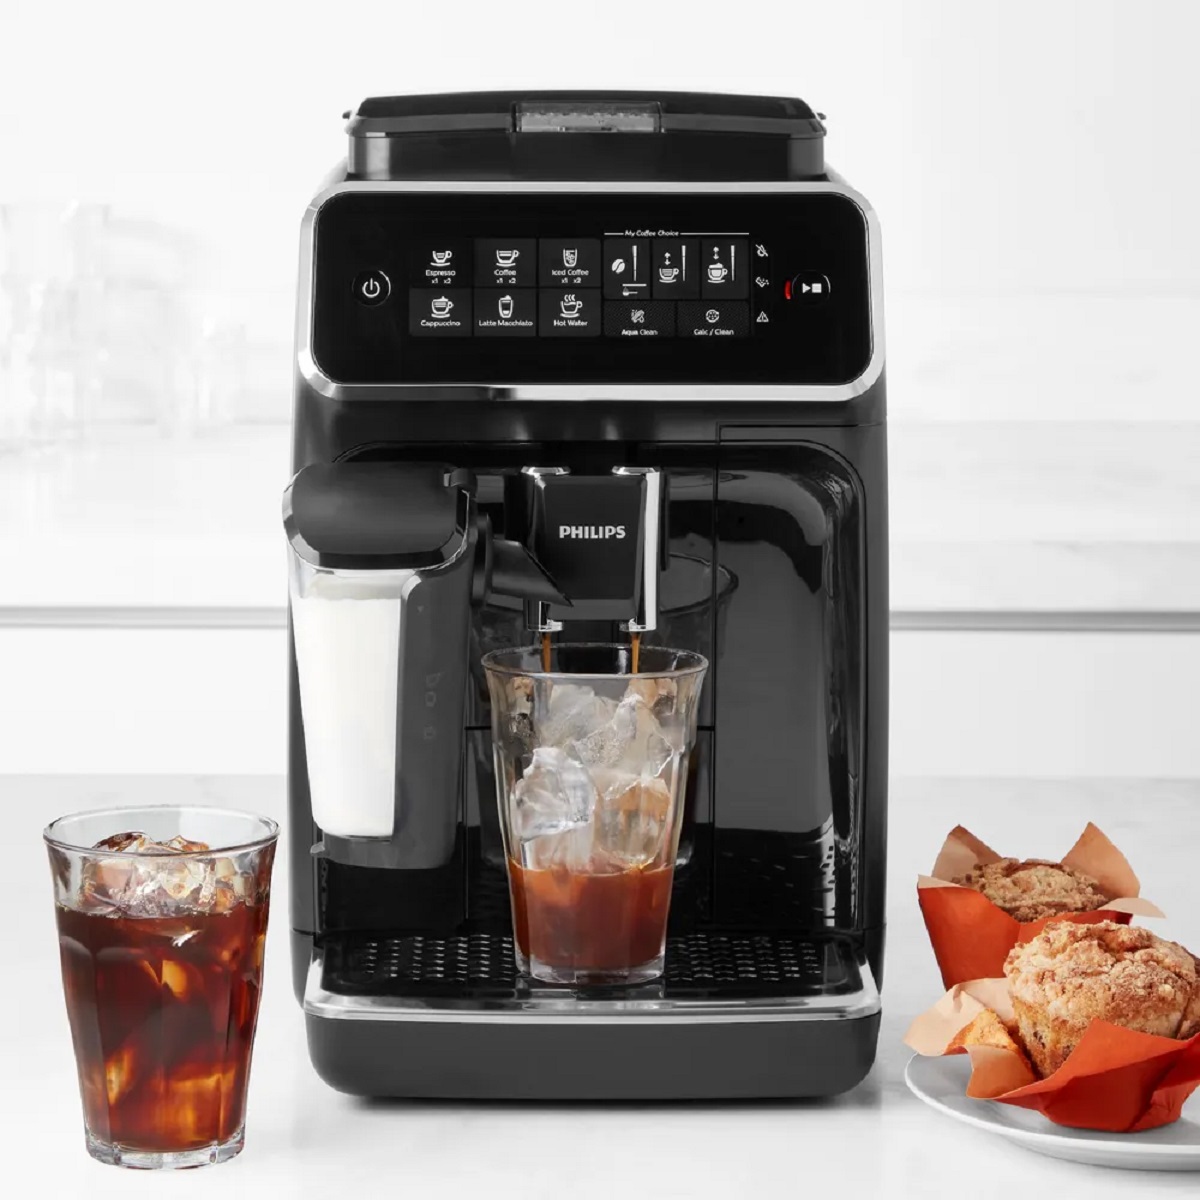 How To Make Iced Coffee With An Espresso Machine